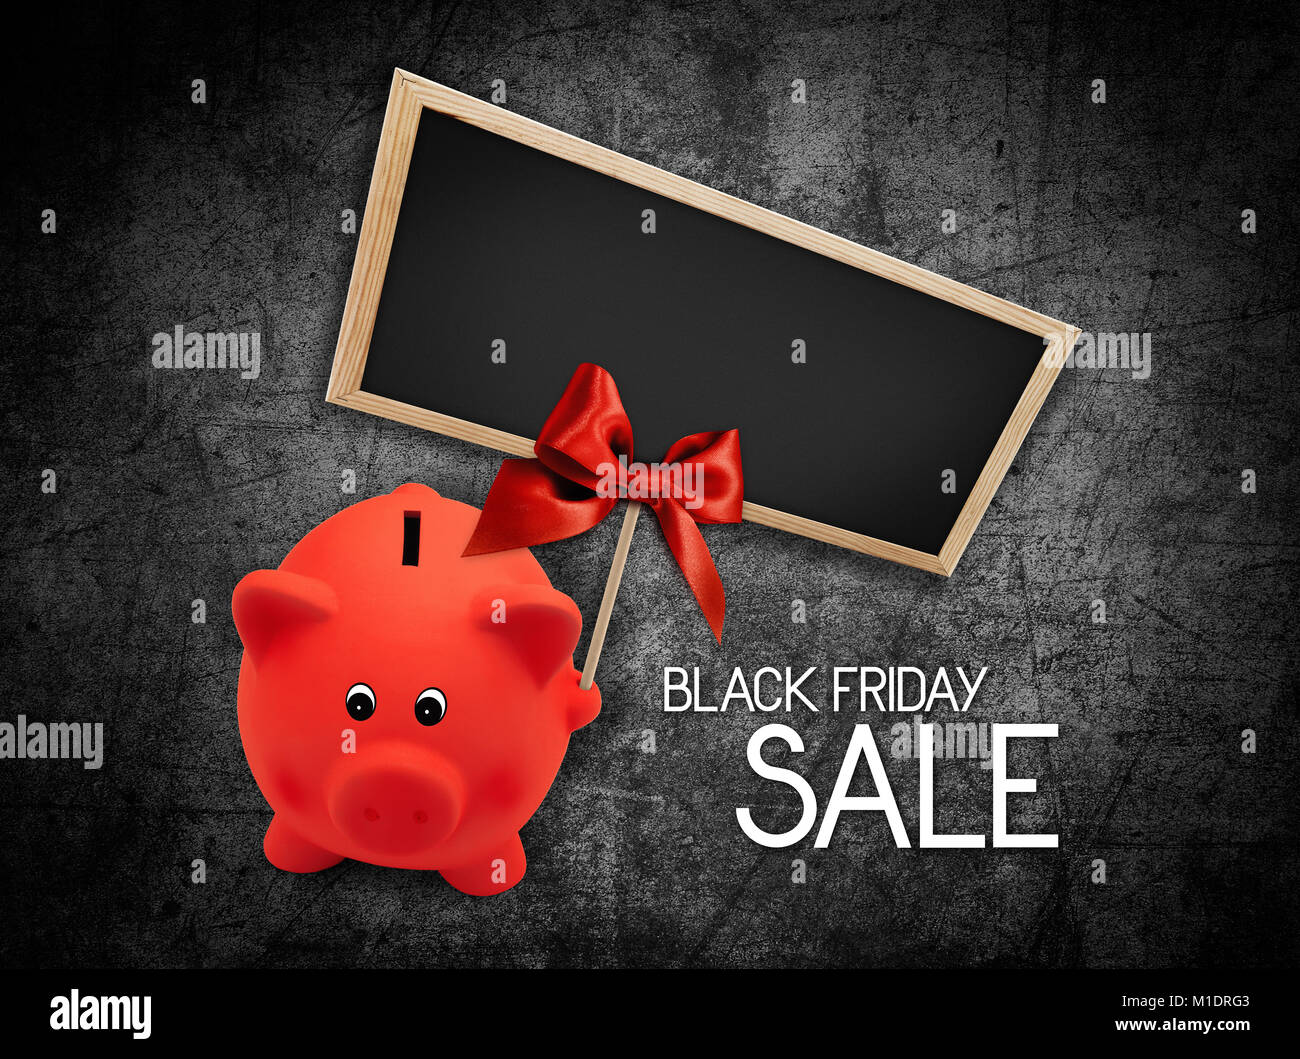 Black Friday sale text blackboard and piggy bank with red ribbon bow on black background Stock Photo